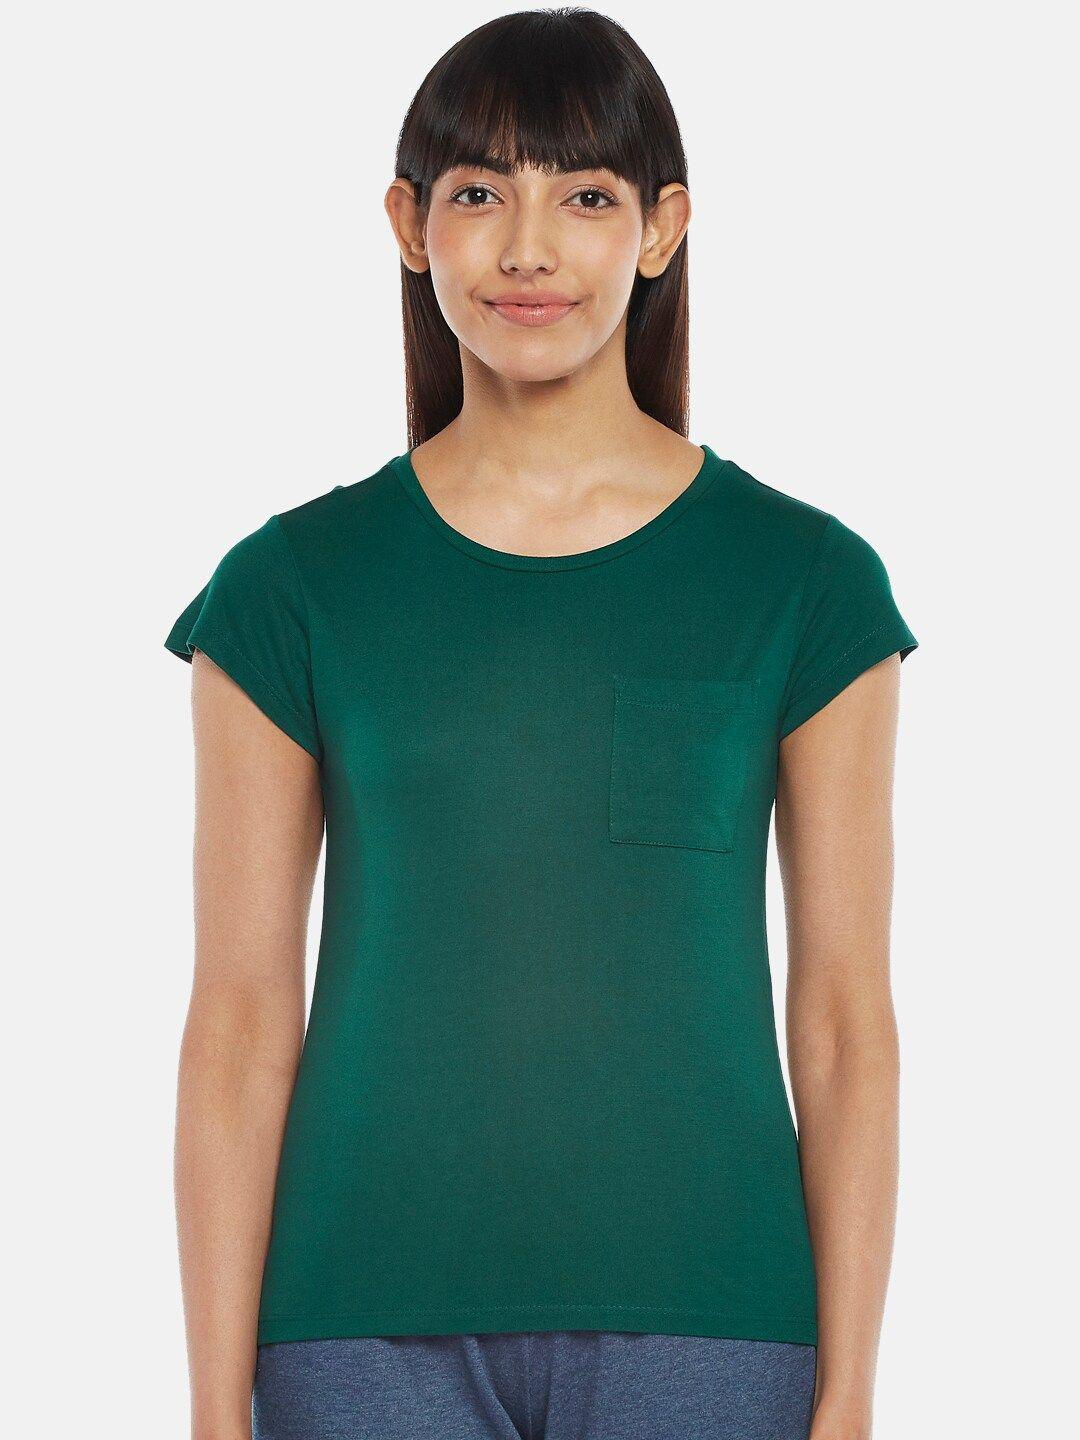 dreamz by pantaloons women round neck short sleeve green top